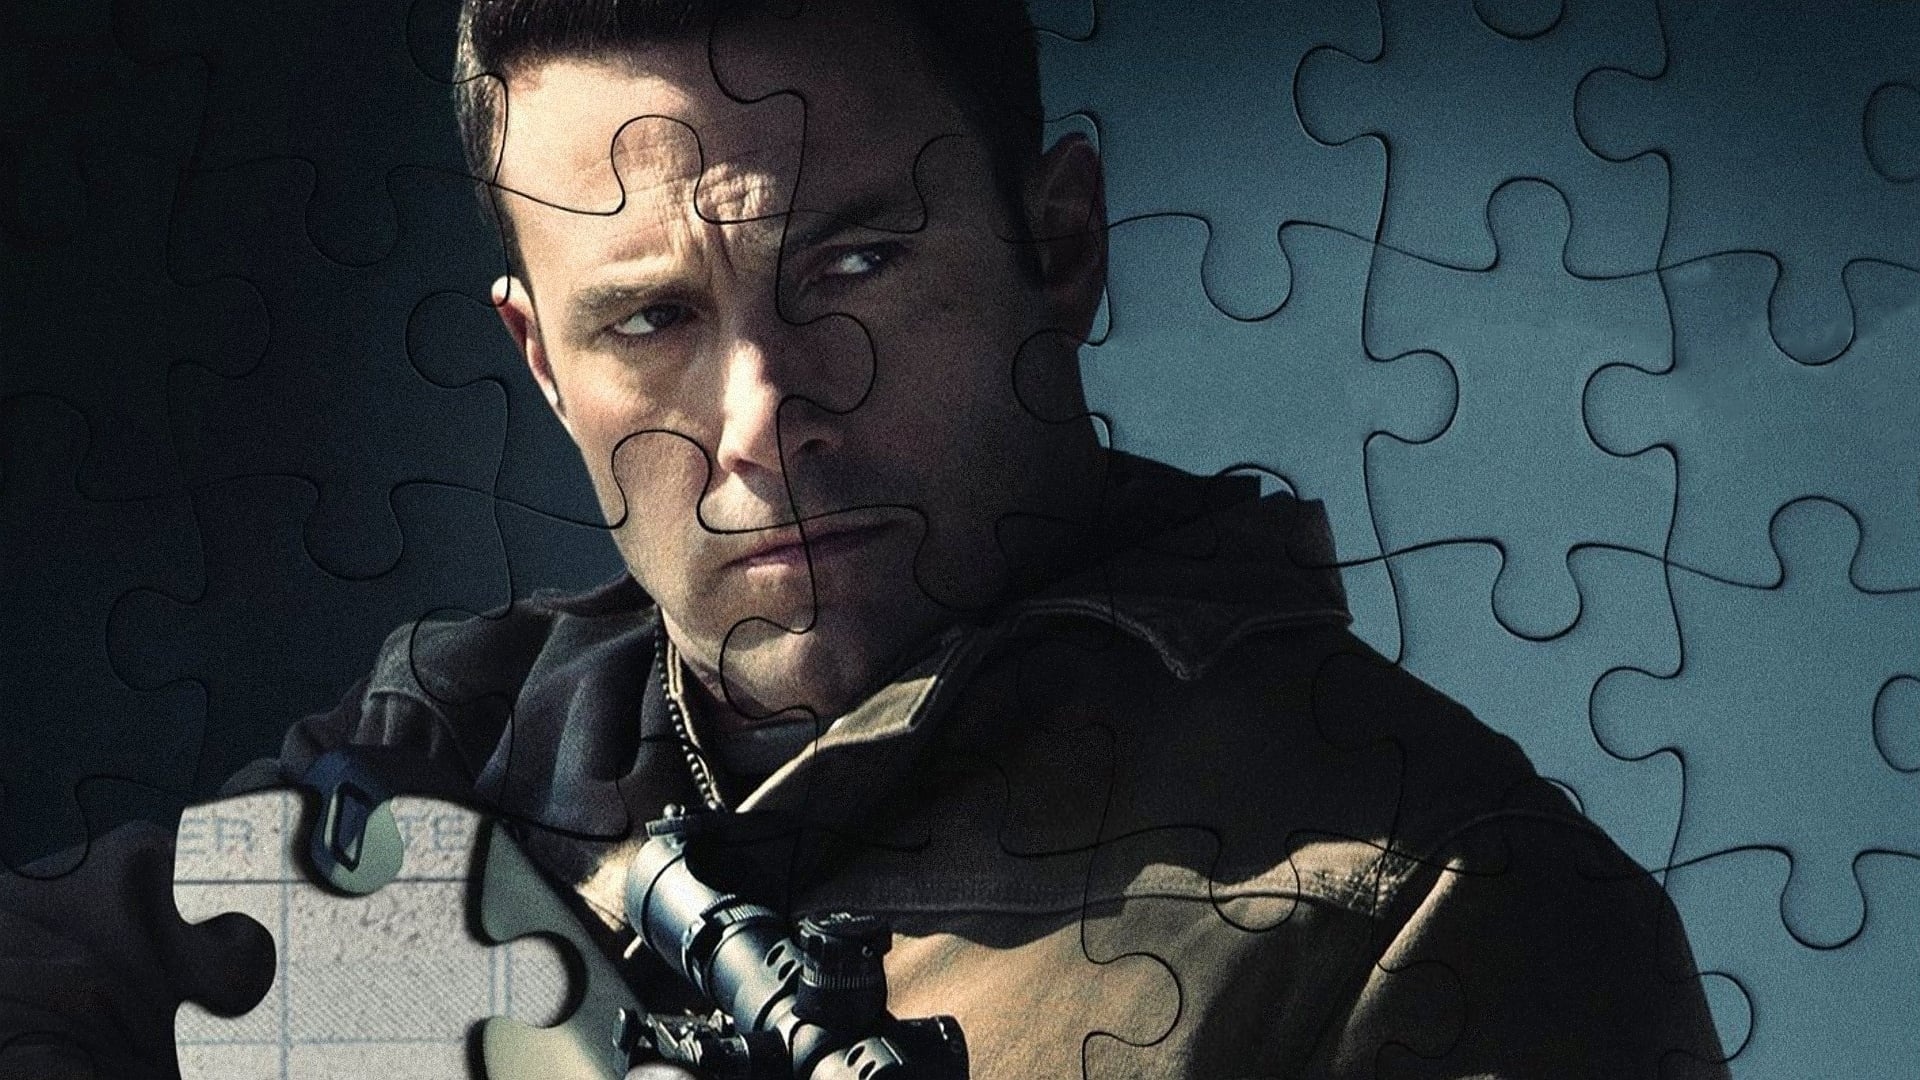 The Accountant Movie, Incluvie review, Diverse representation, Inclusive storytelling, 1920x1080 Full HD Desktop